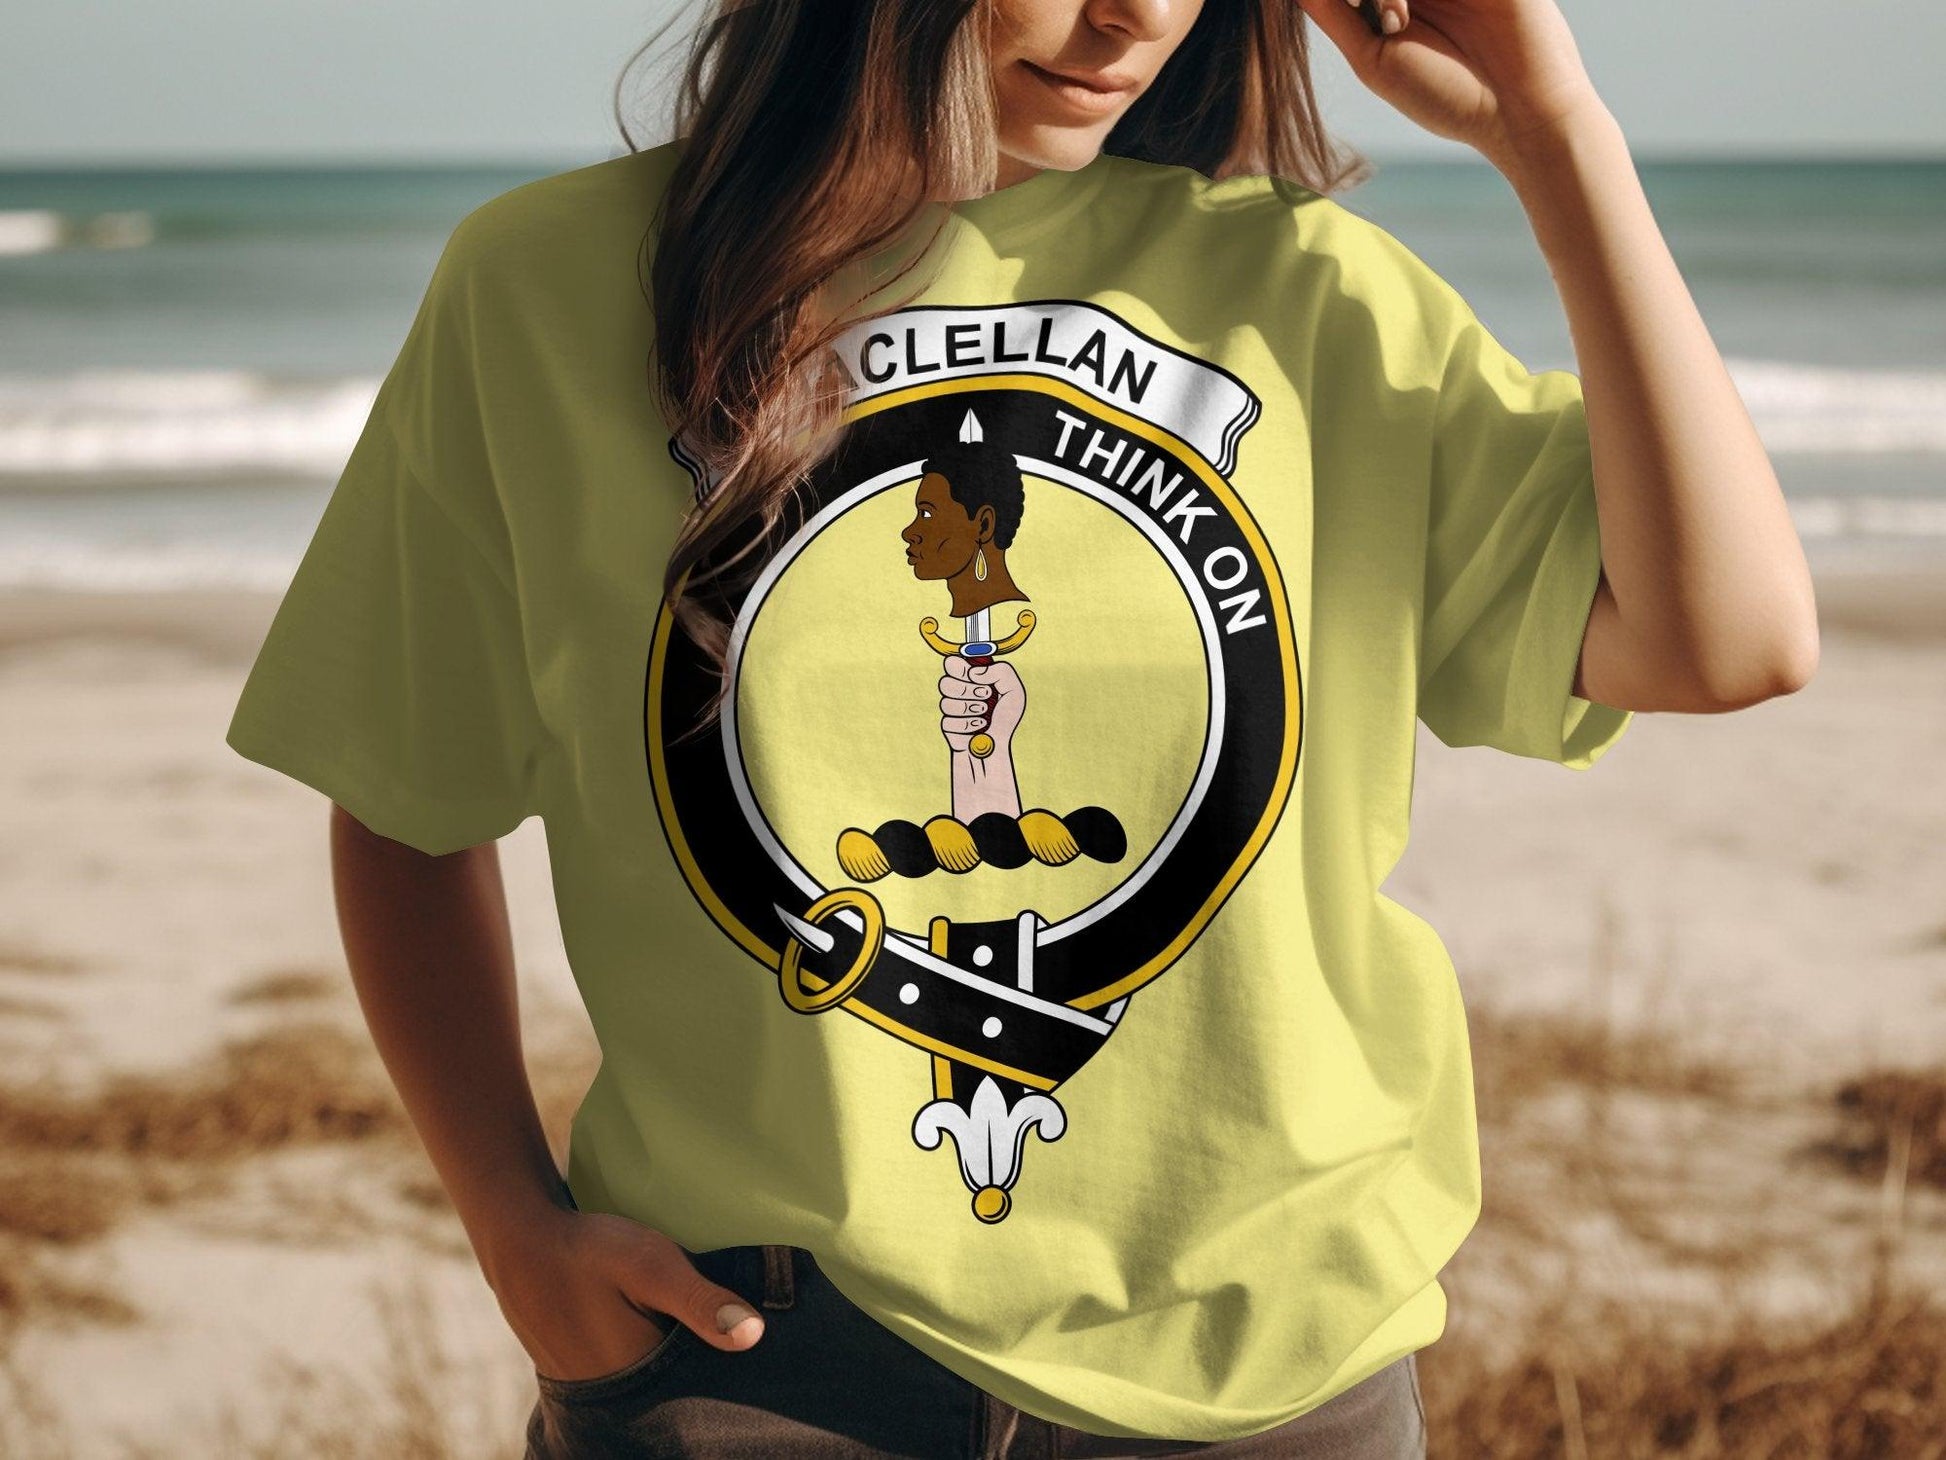 Clan MacLellan Crest Think On Motto Emblem T-Shirt - Living Stone Gifts